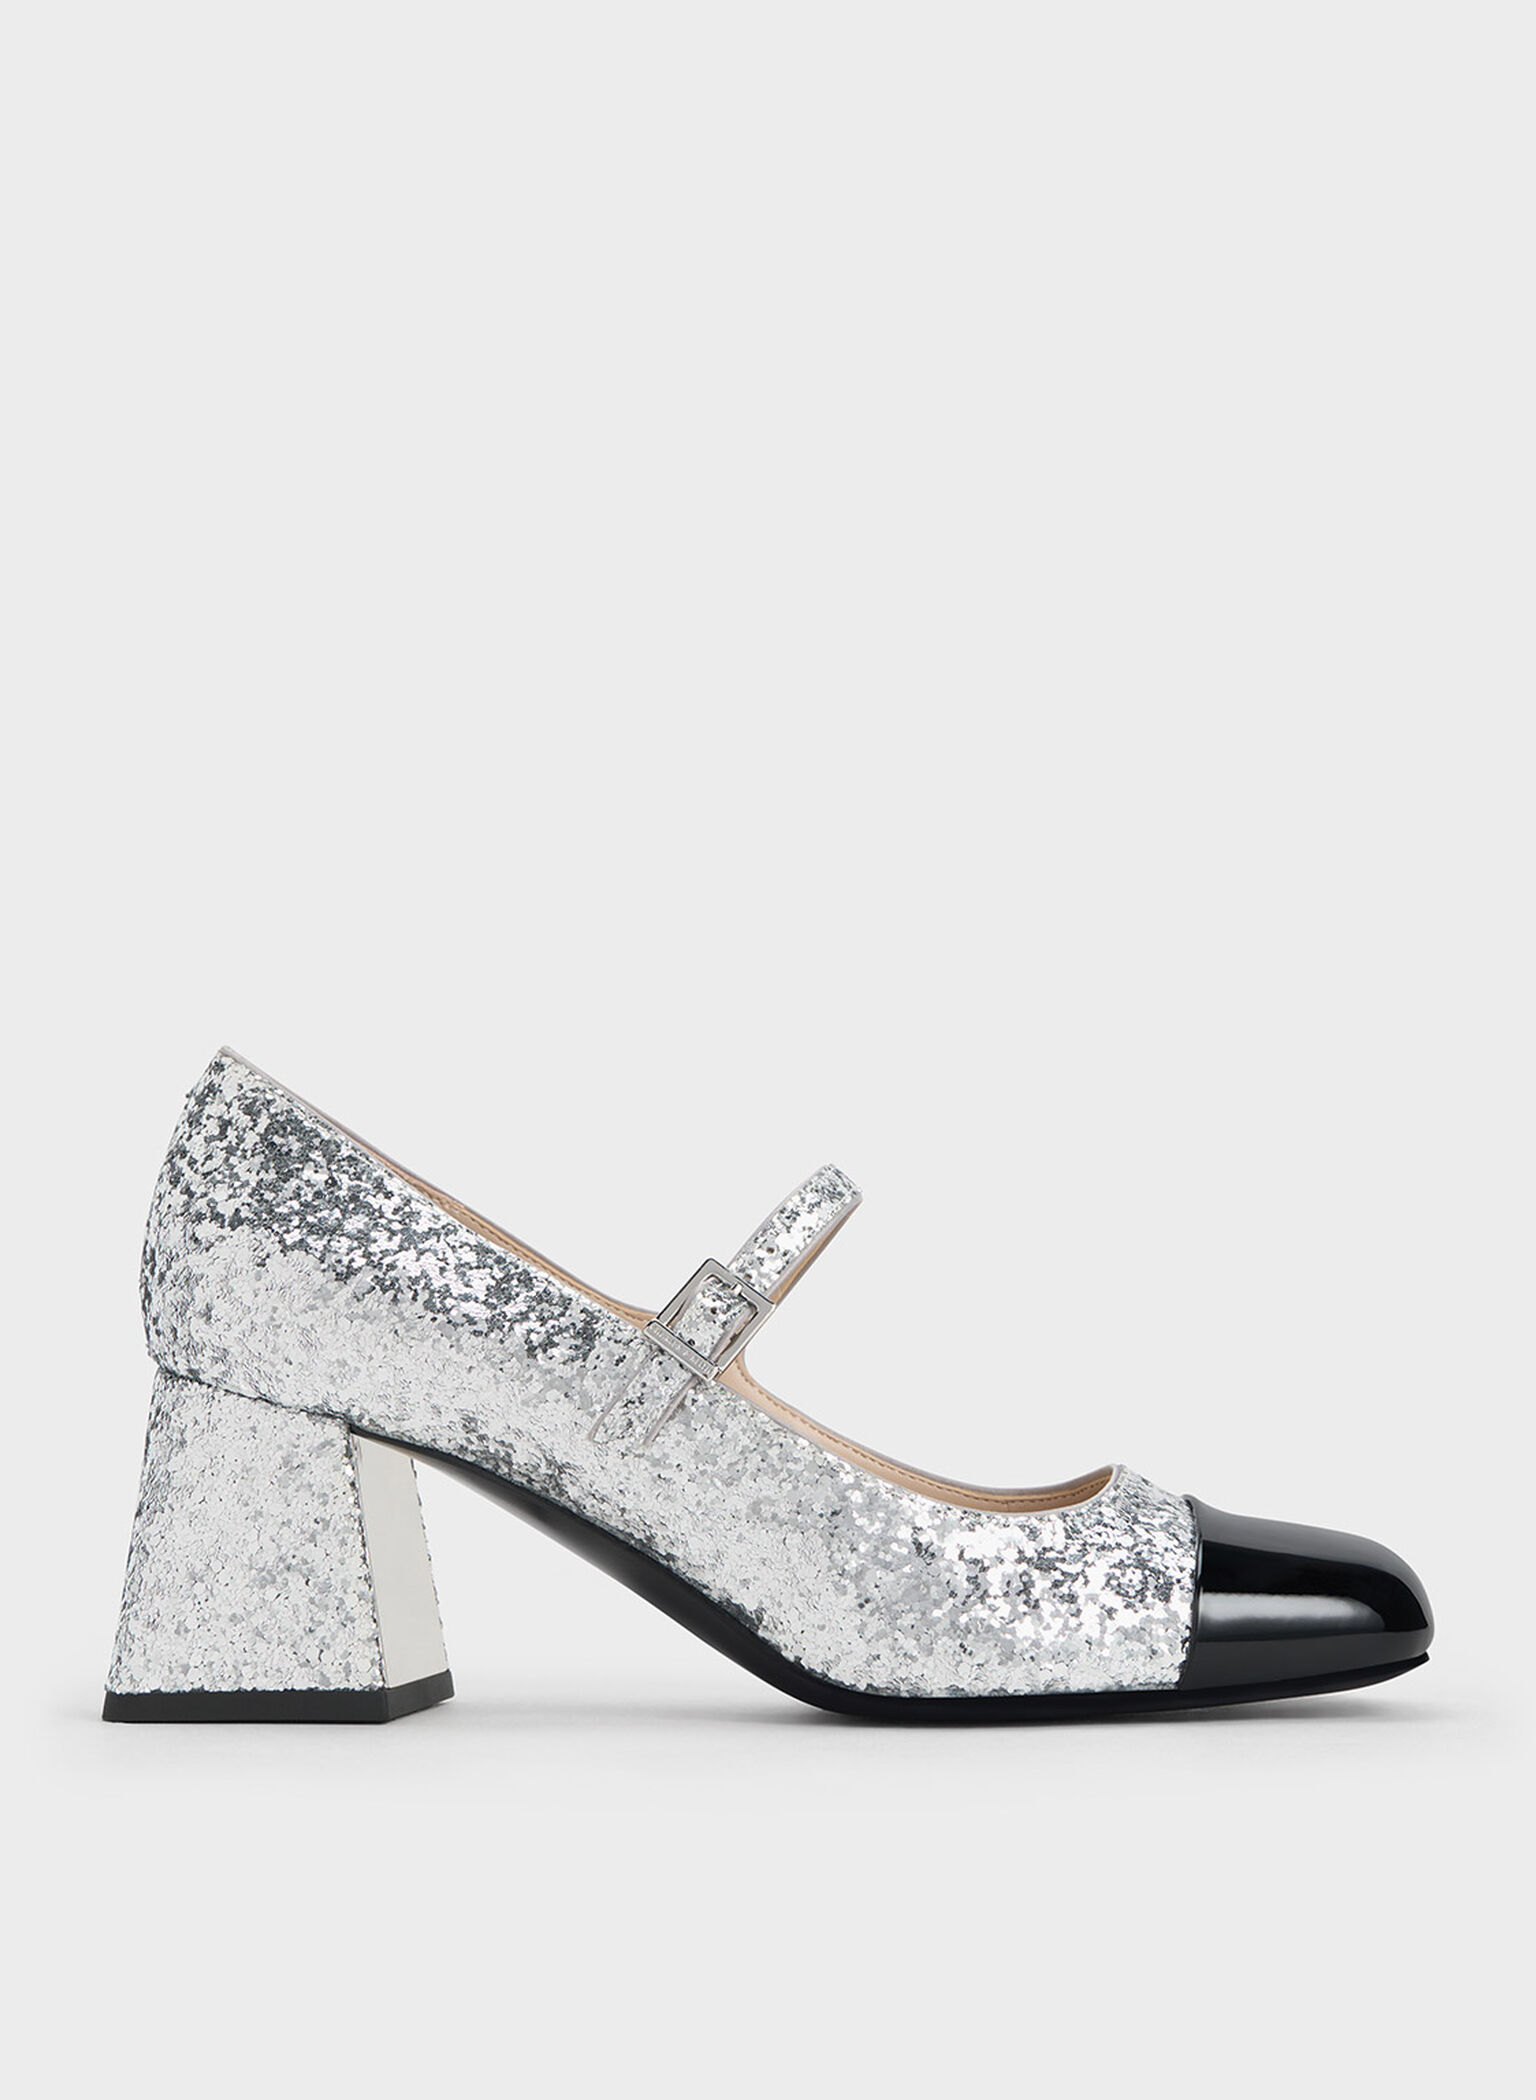 Charles & Keith - Women's Patent Glittered Trapeze-Heel Mary Janes, Silver, US 7